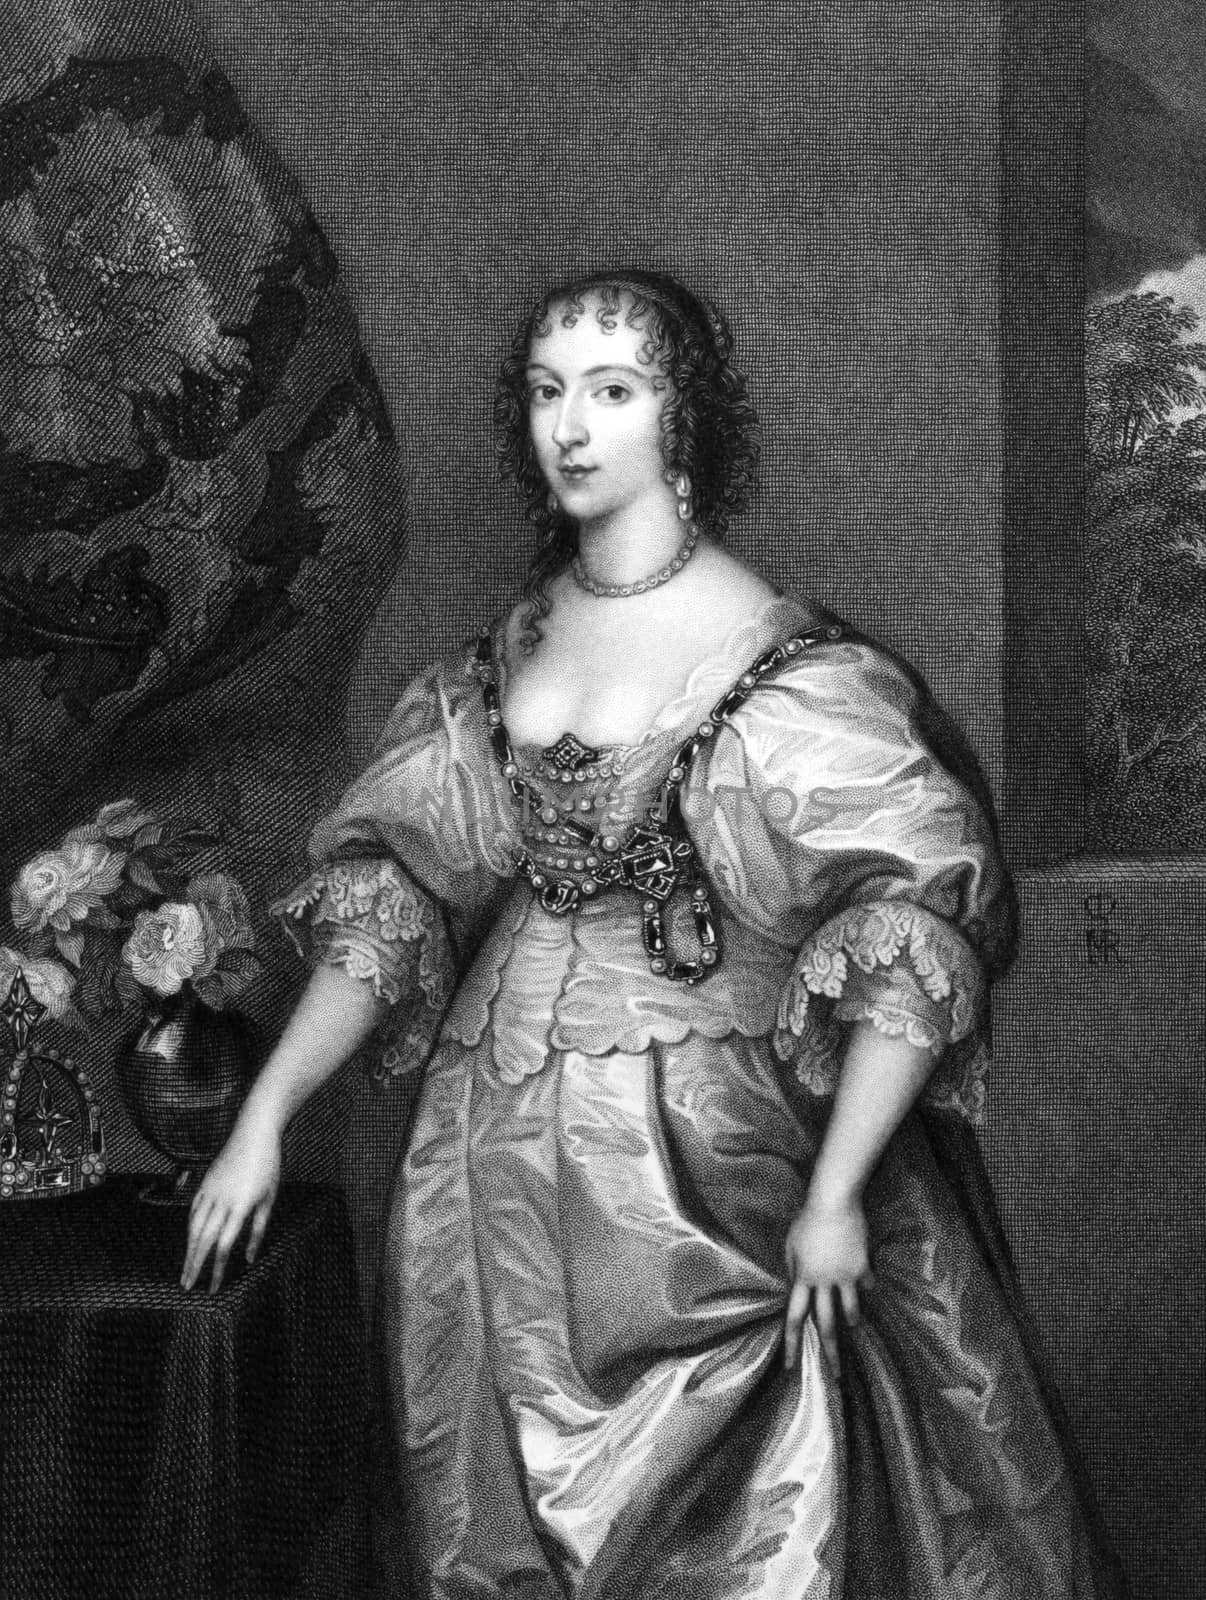 Henrietta Maria of France (1609-1669) on engraving from 1830. Queen consort of England, Scotland and Ireland as the wife of King Charles I. Engraved by H.T.Ryall and published in ''Portraits of Illustrious Personages of Great Britain'',UK,1830.